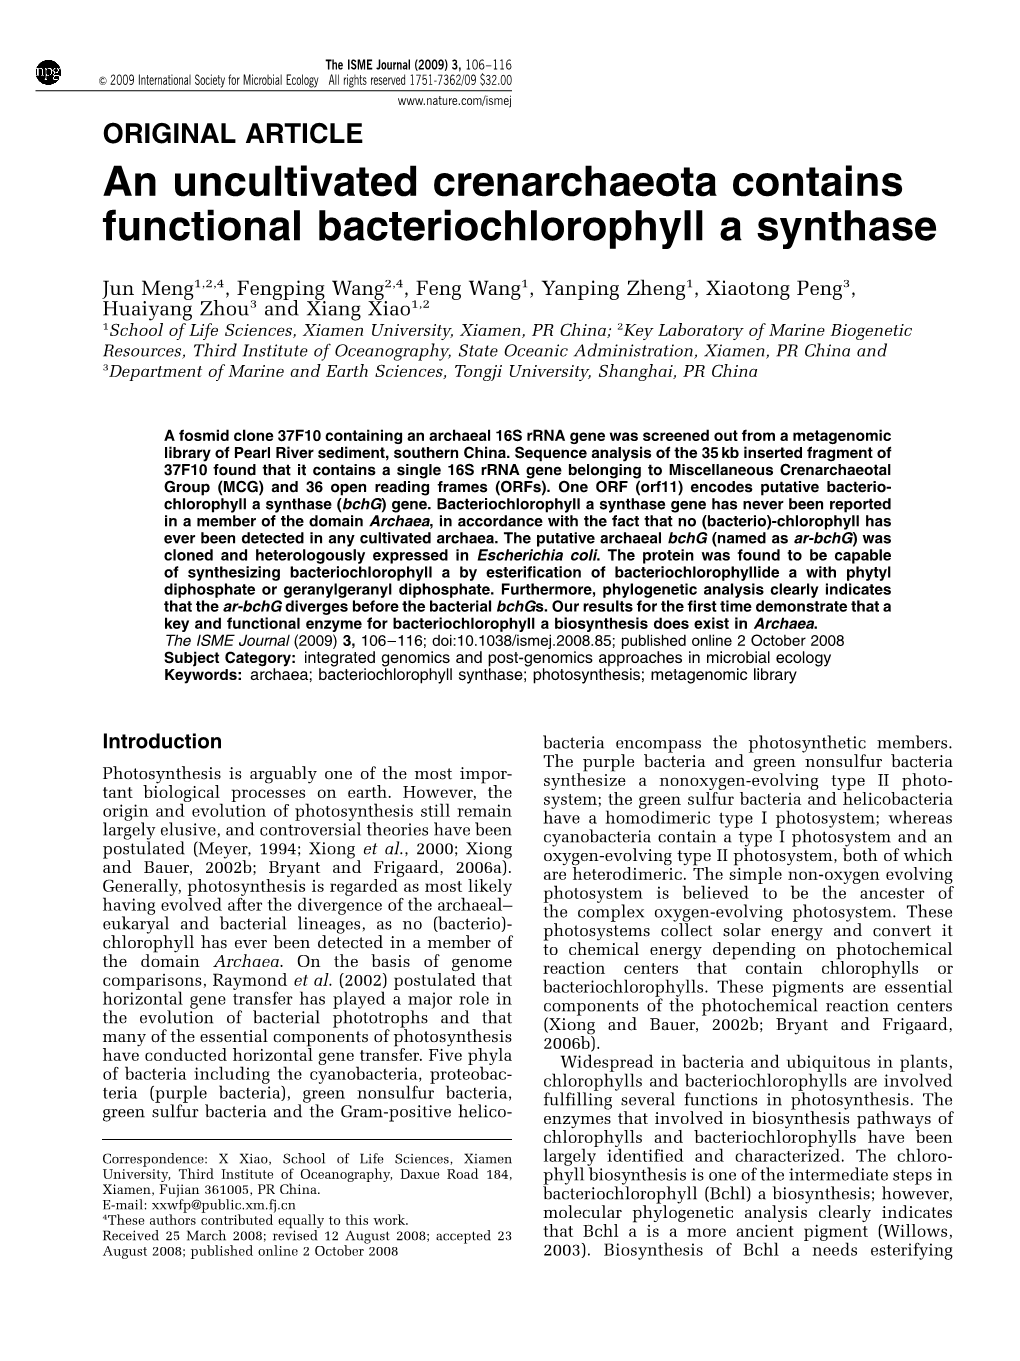 An Uncultivated Crenarchaeota Contains Functional Bacteriochlorophyll a Synthase